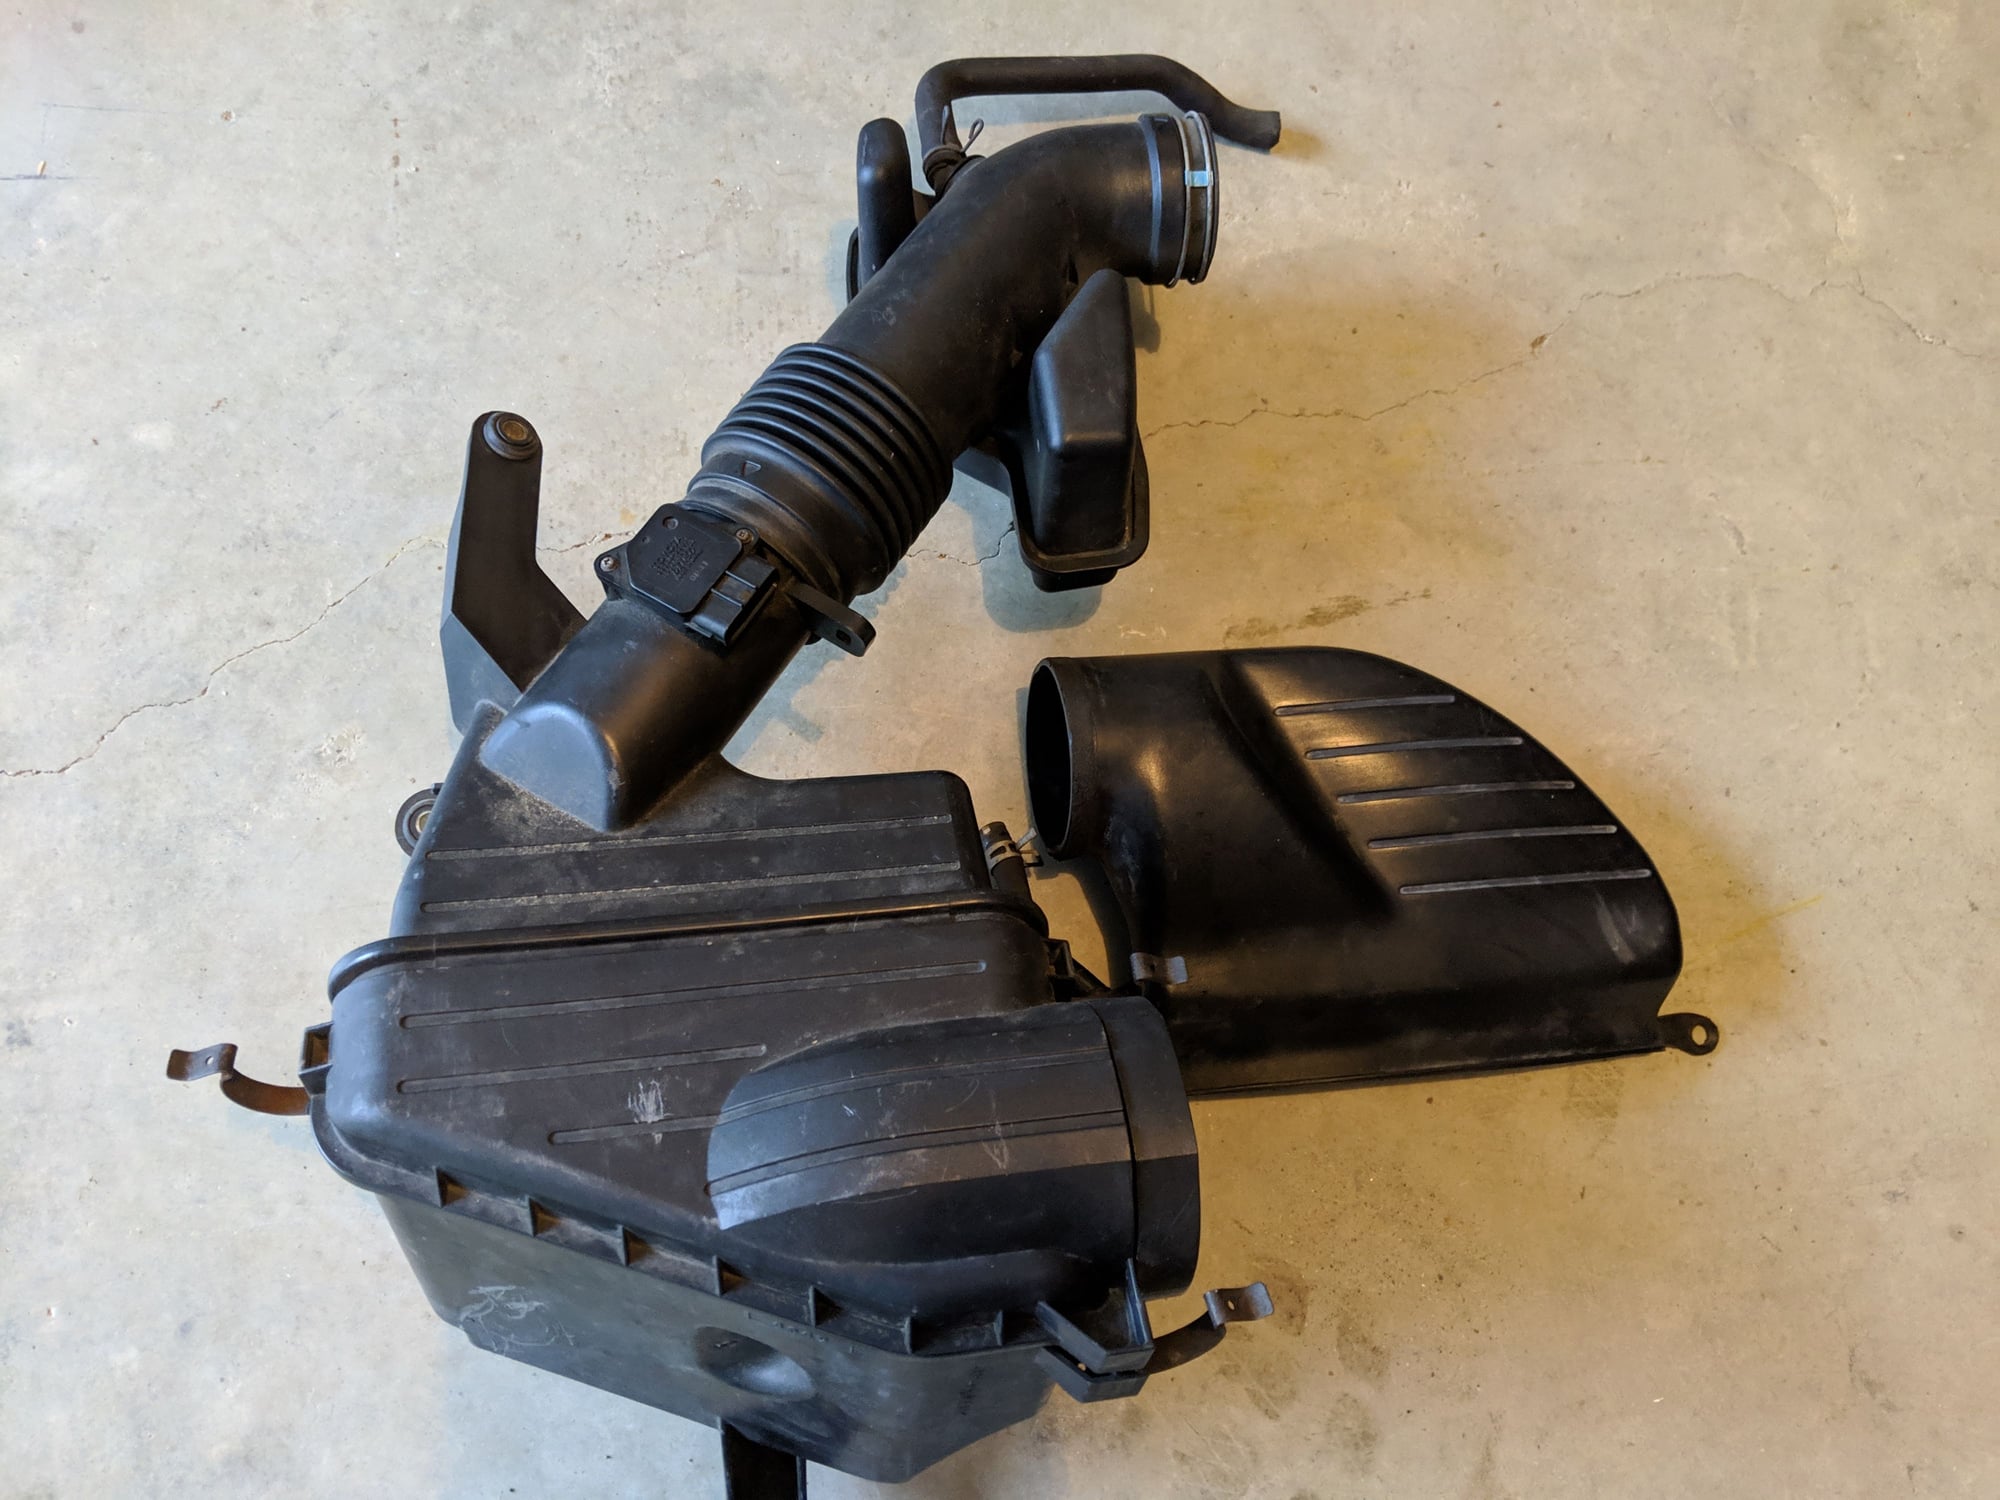 Engine - Intake/Fuel - 01-05 IS300 OEM Intake/Airbox - Used - 2001 to 2005 Lexus IS300 - Mason, OH 45040, United States